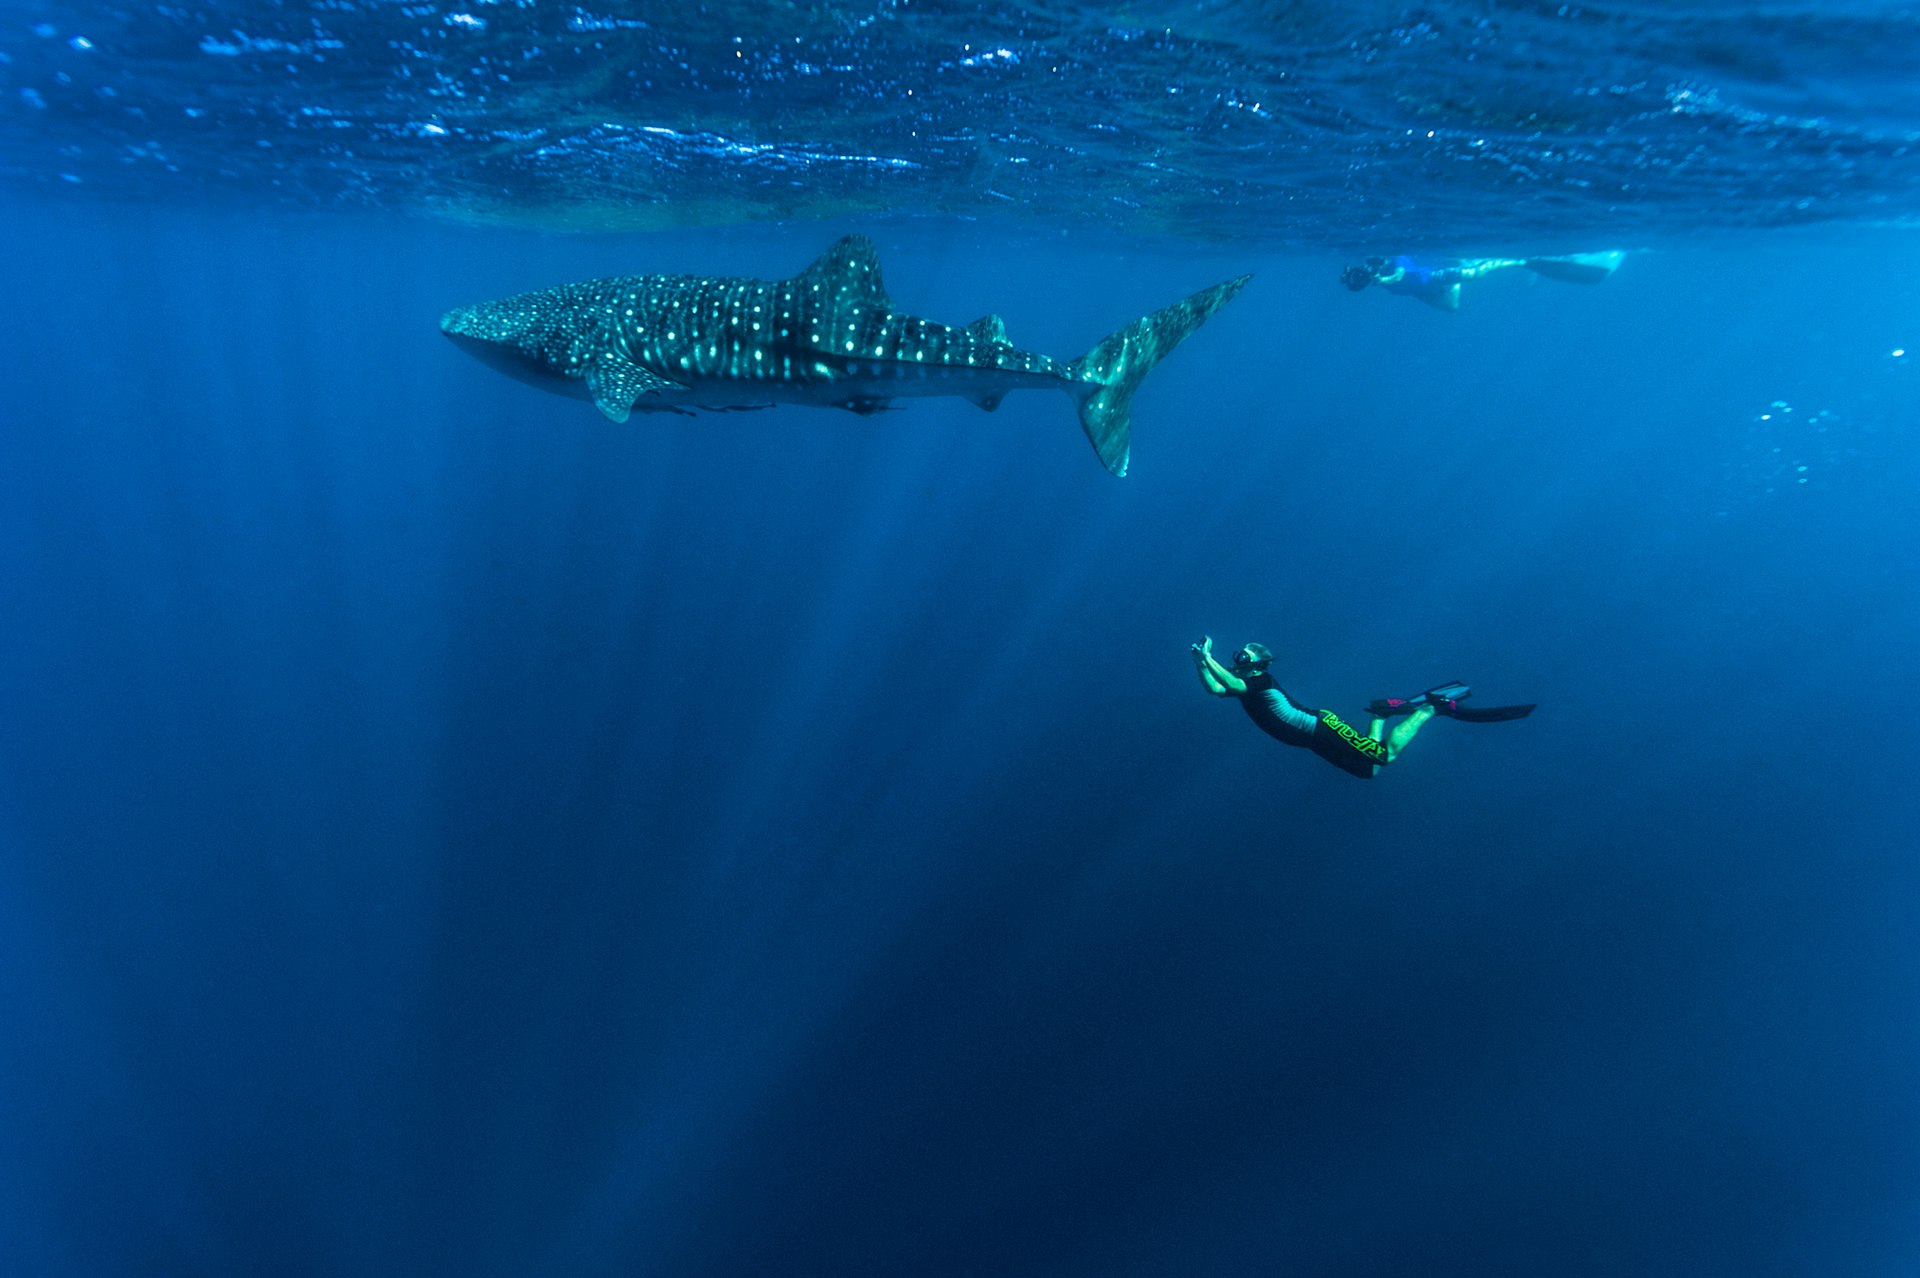 A free diver takes an underwater photograph of a whale shark passing above